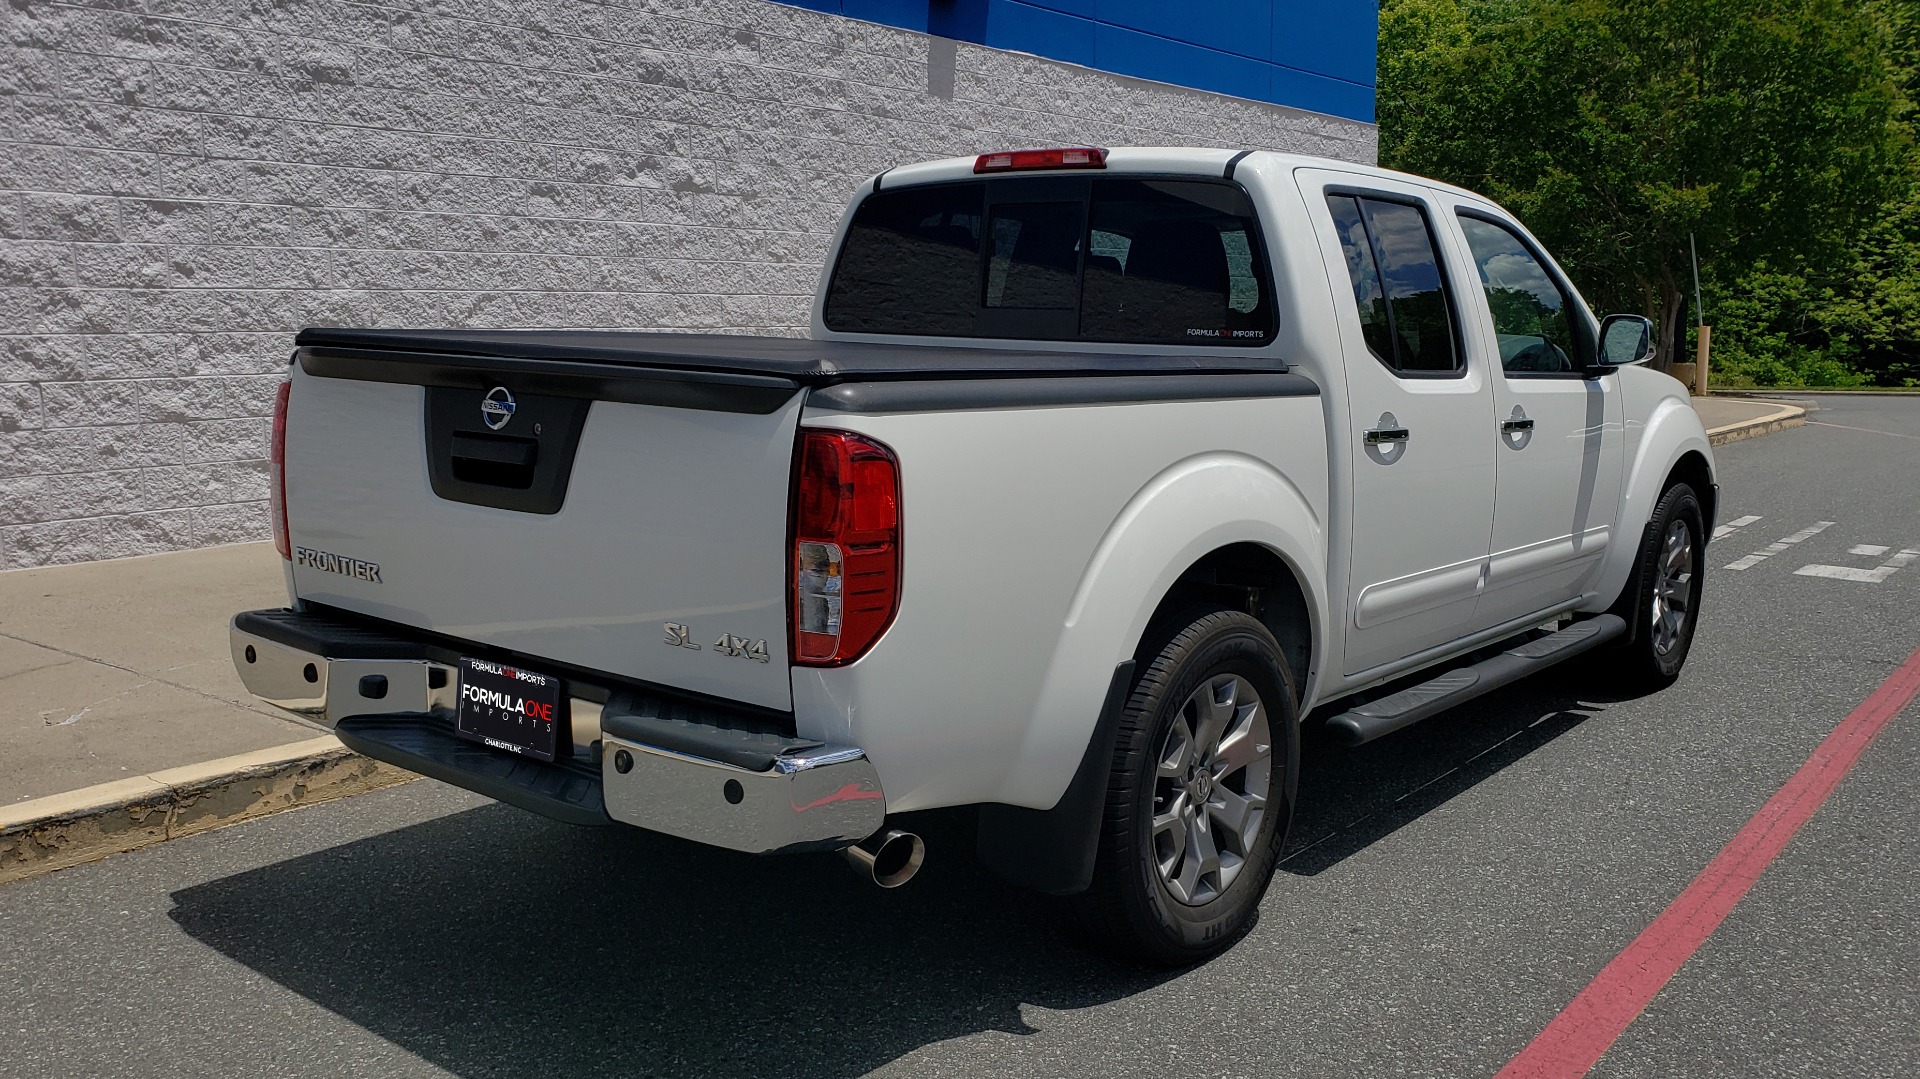 Used 2019 Nissan FRONTIER SL CREW CAB / 4X4 / NAV / SUNROOF / ROCKFORD FOSGATE / LOADED for sale Sold at Formula Imports in Charlotte NC 28227 4